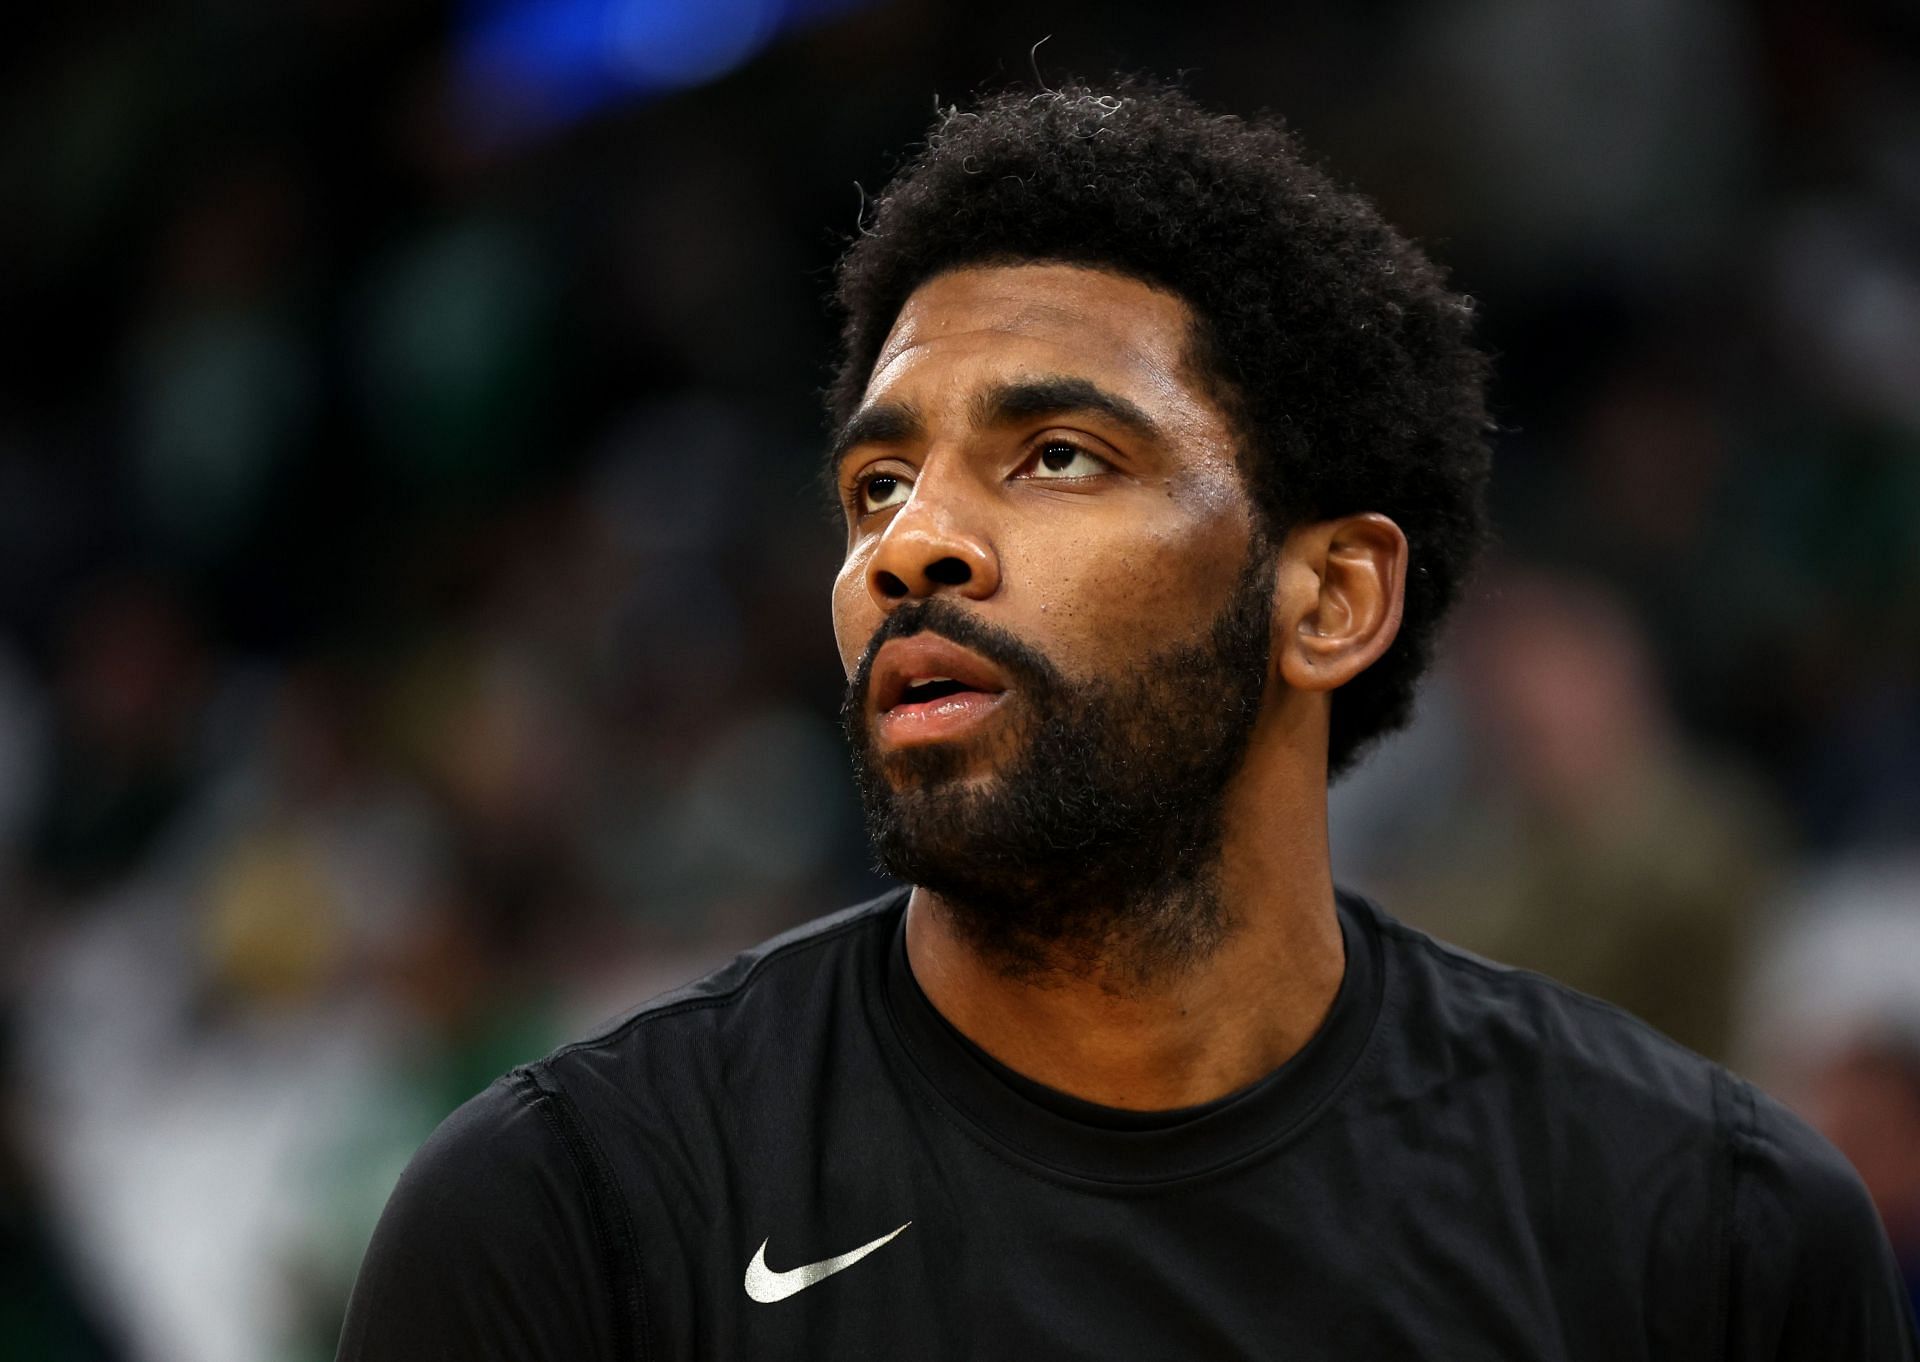 According to reports, Irving wants to be with the LA Lakers beyond next season.